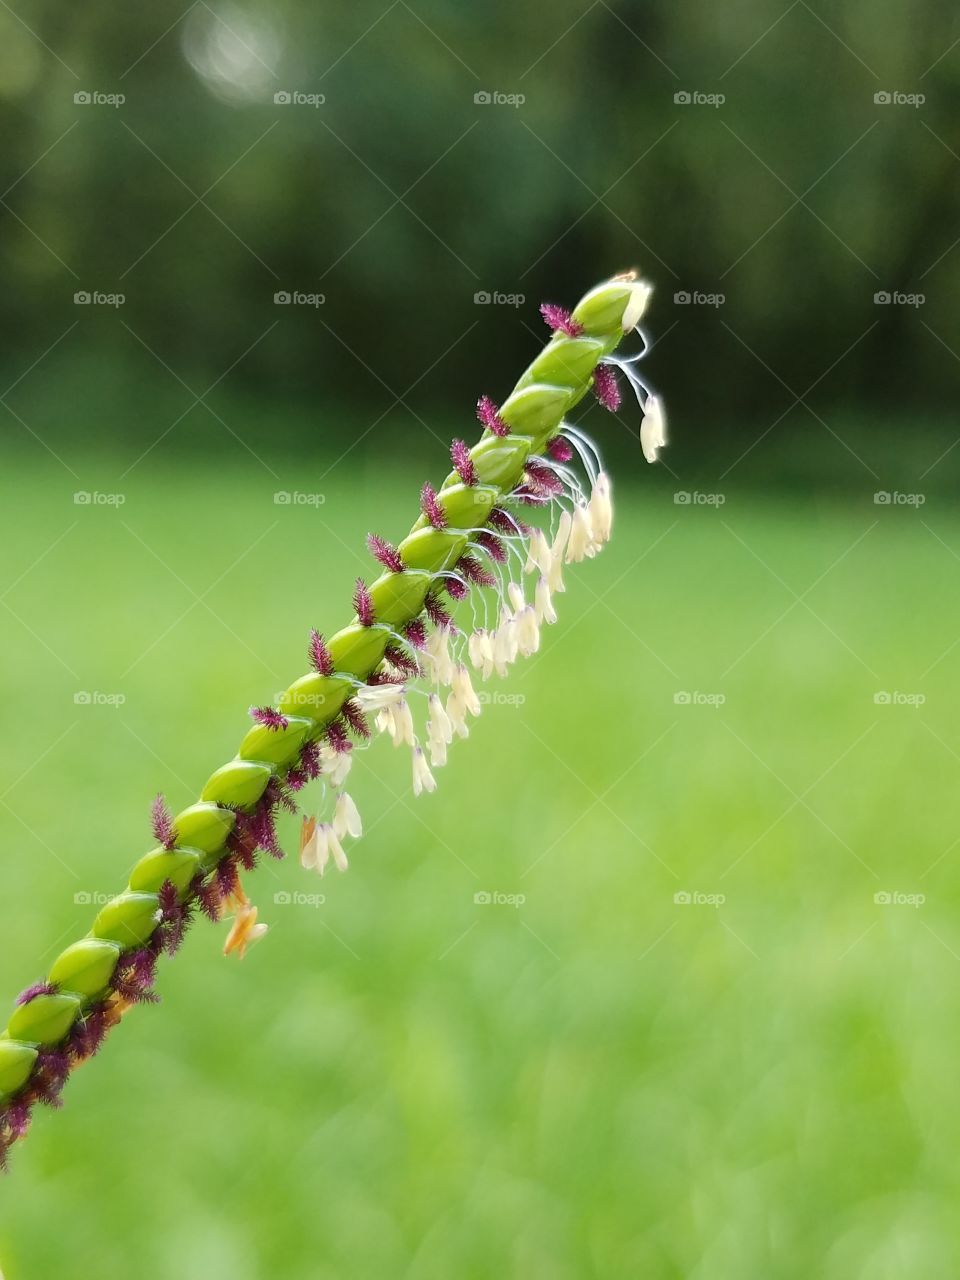 Nature, No Person, Leaf, Outdoors, Grass